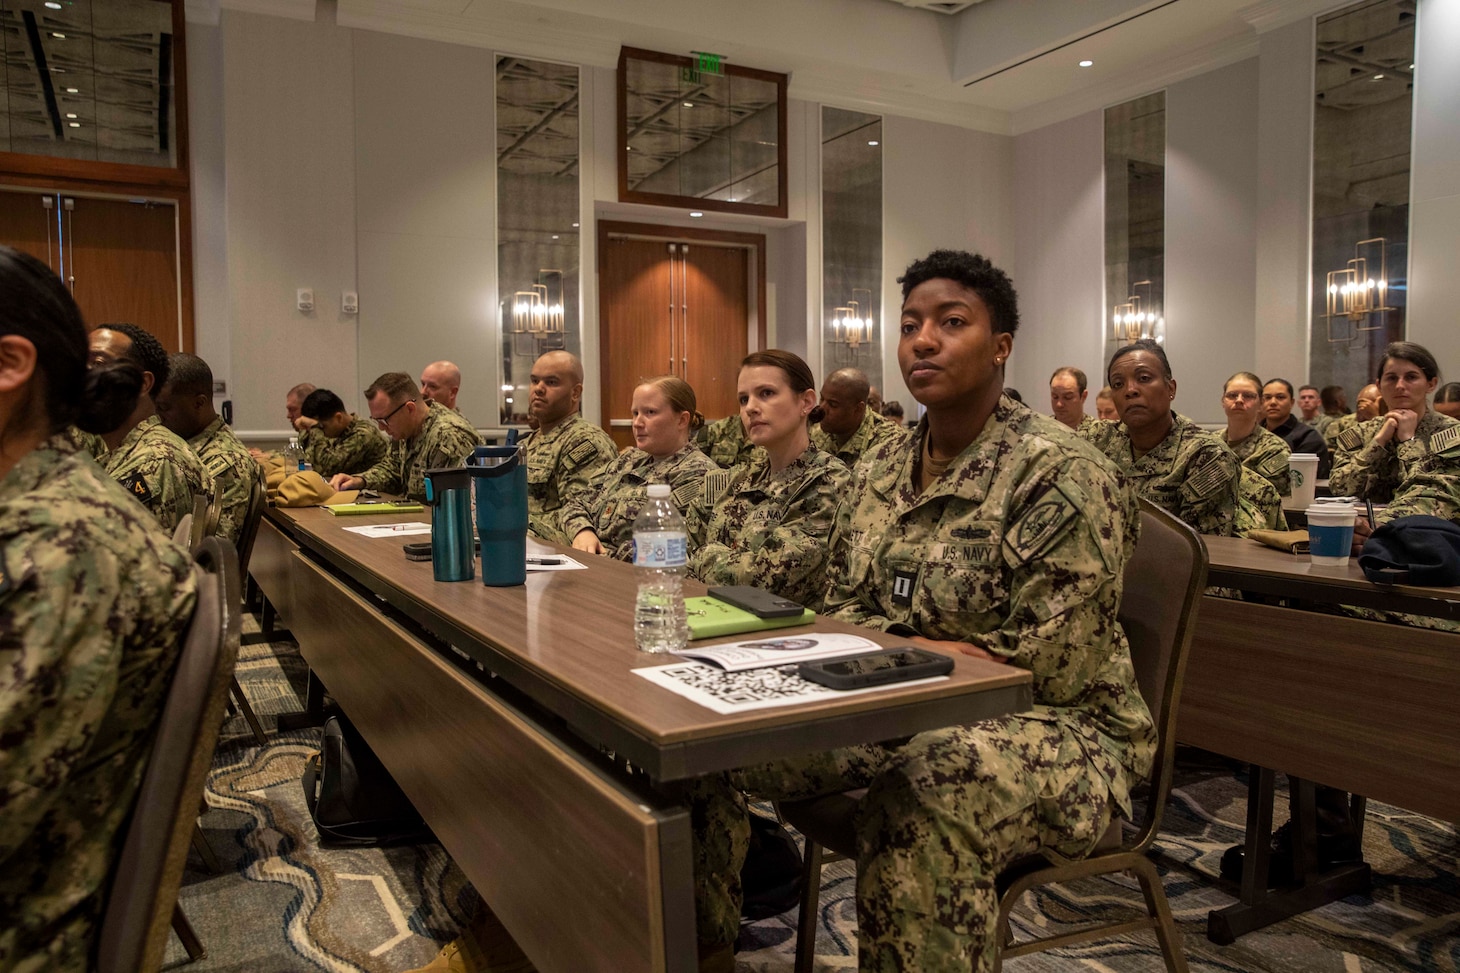 Sailors listen to a panel of speakers during the first-ever Naval Surface Force Diversity, Equity, and Inclusion Summit (DEI) Symposium.